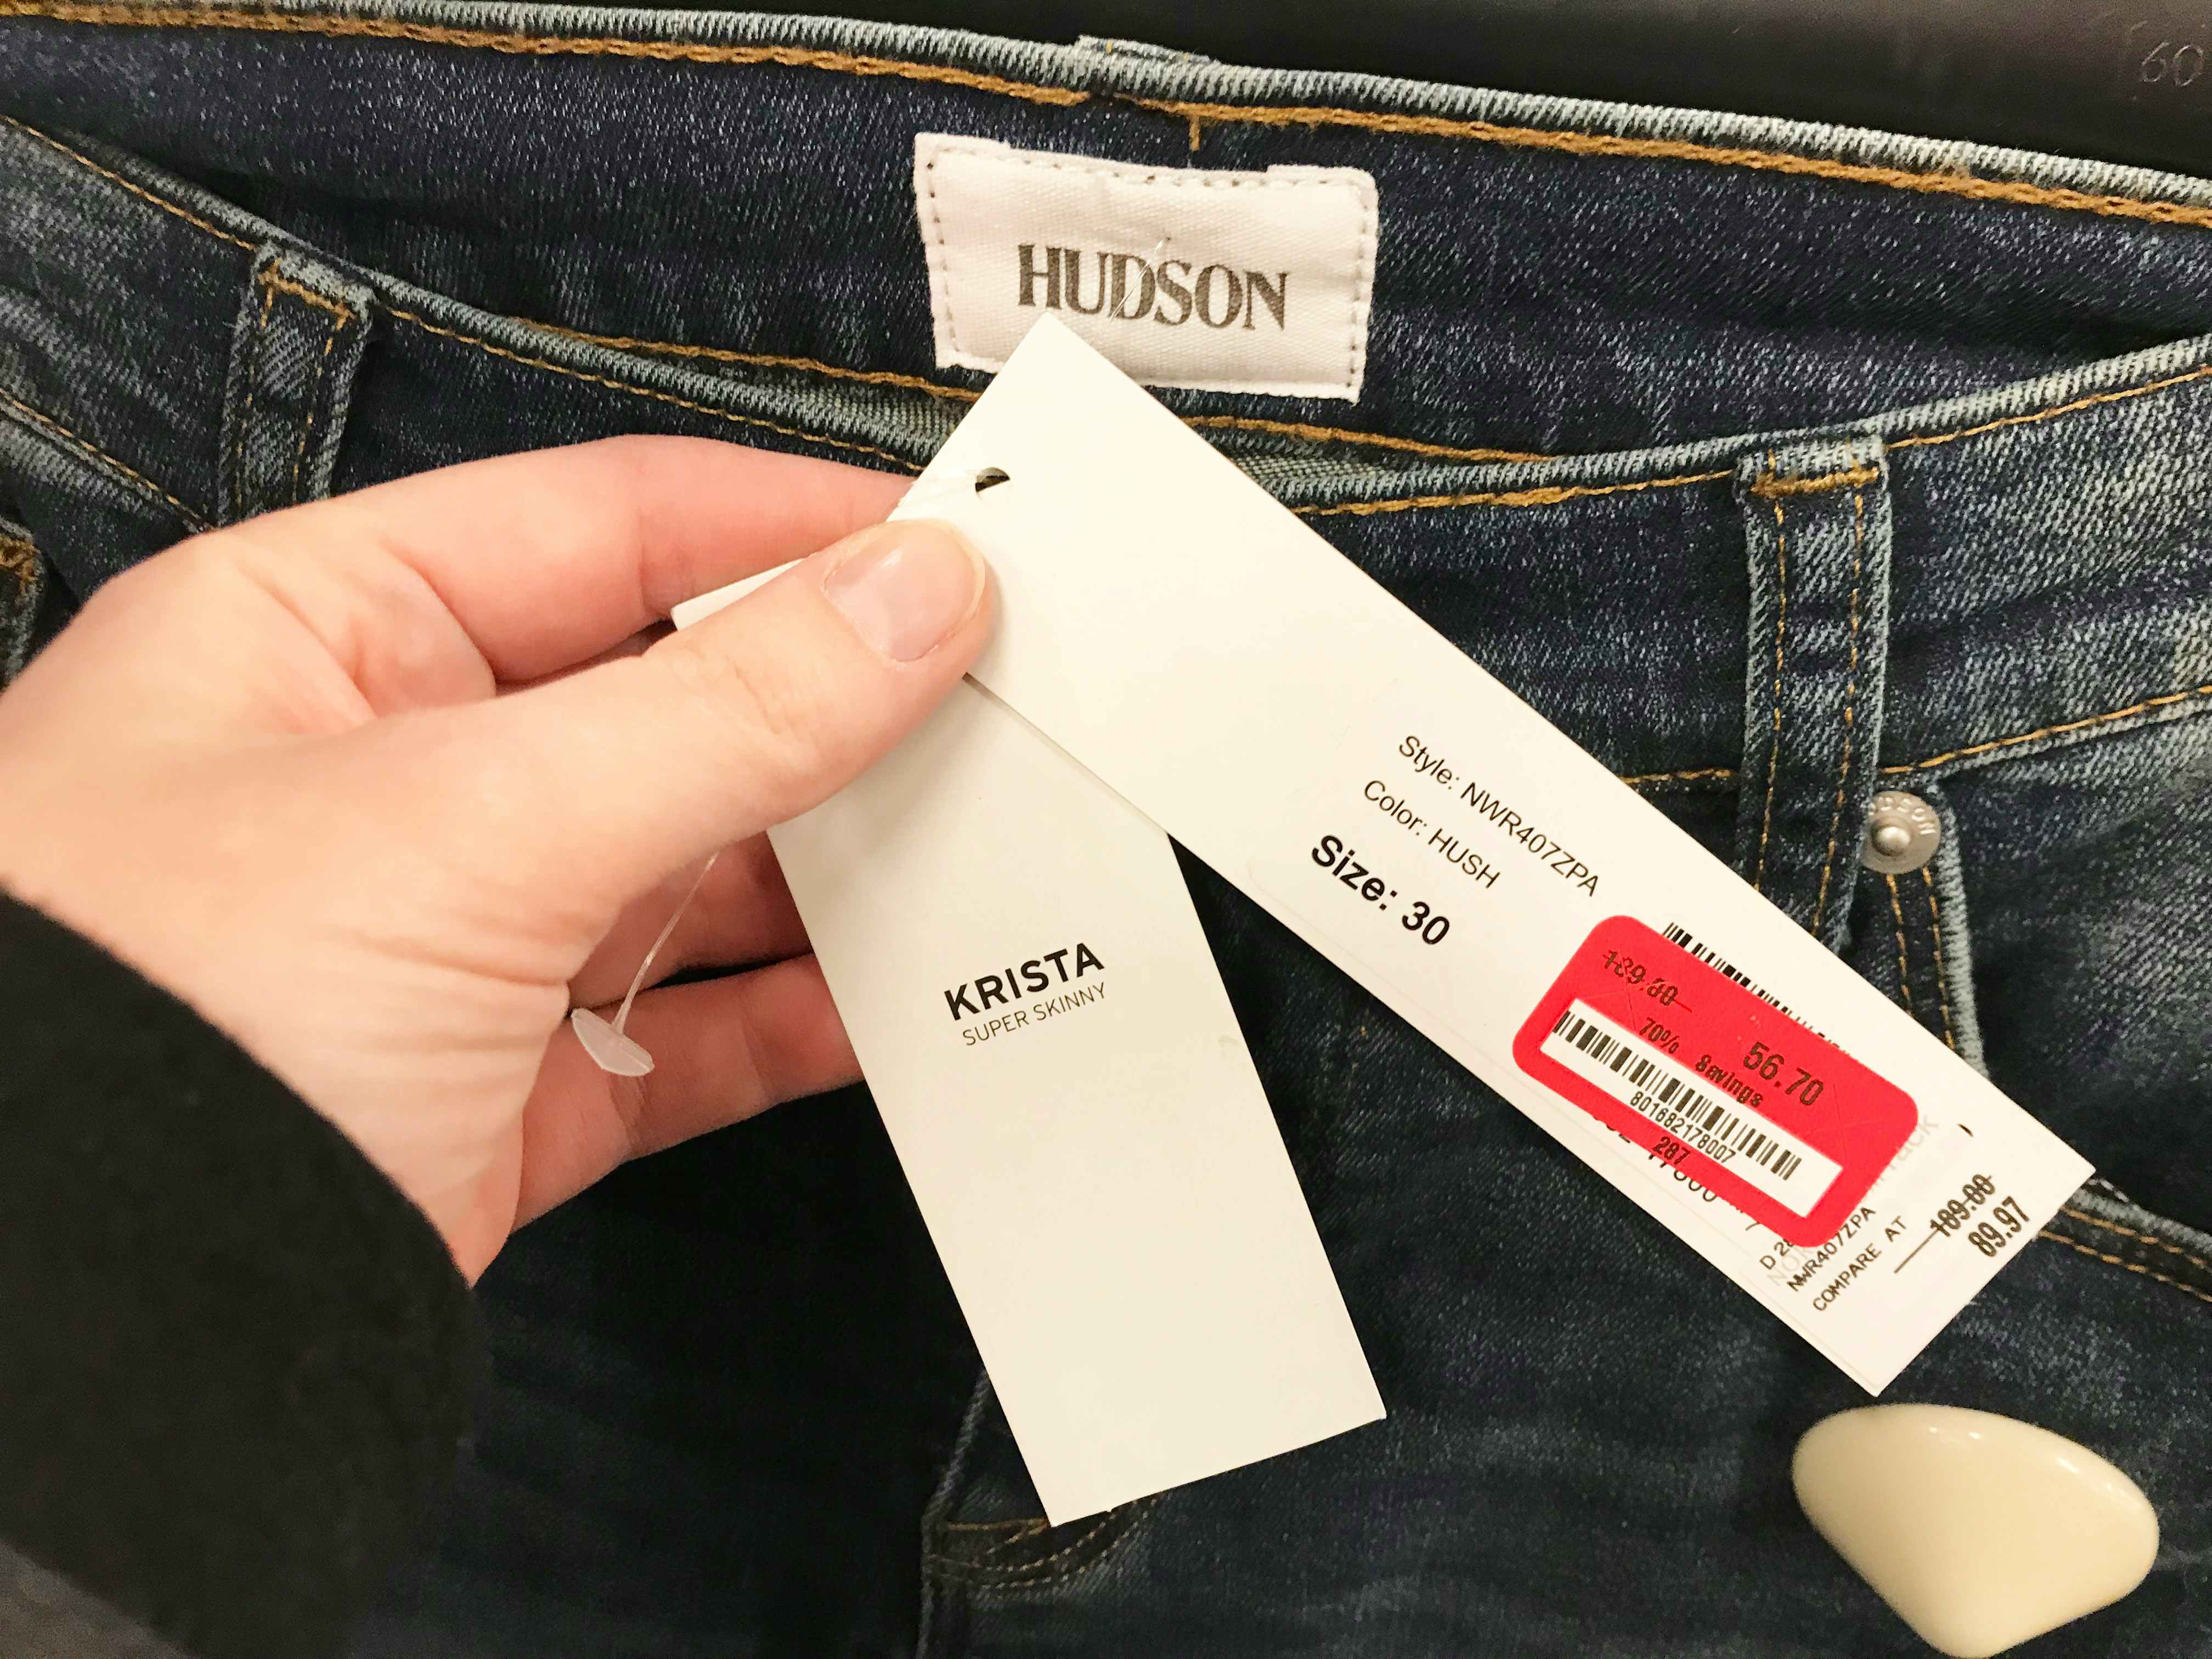 7. Buy Hudson jeans online at Nordstrom Rack to save up to 70%.